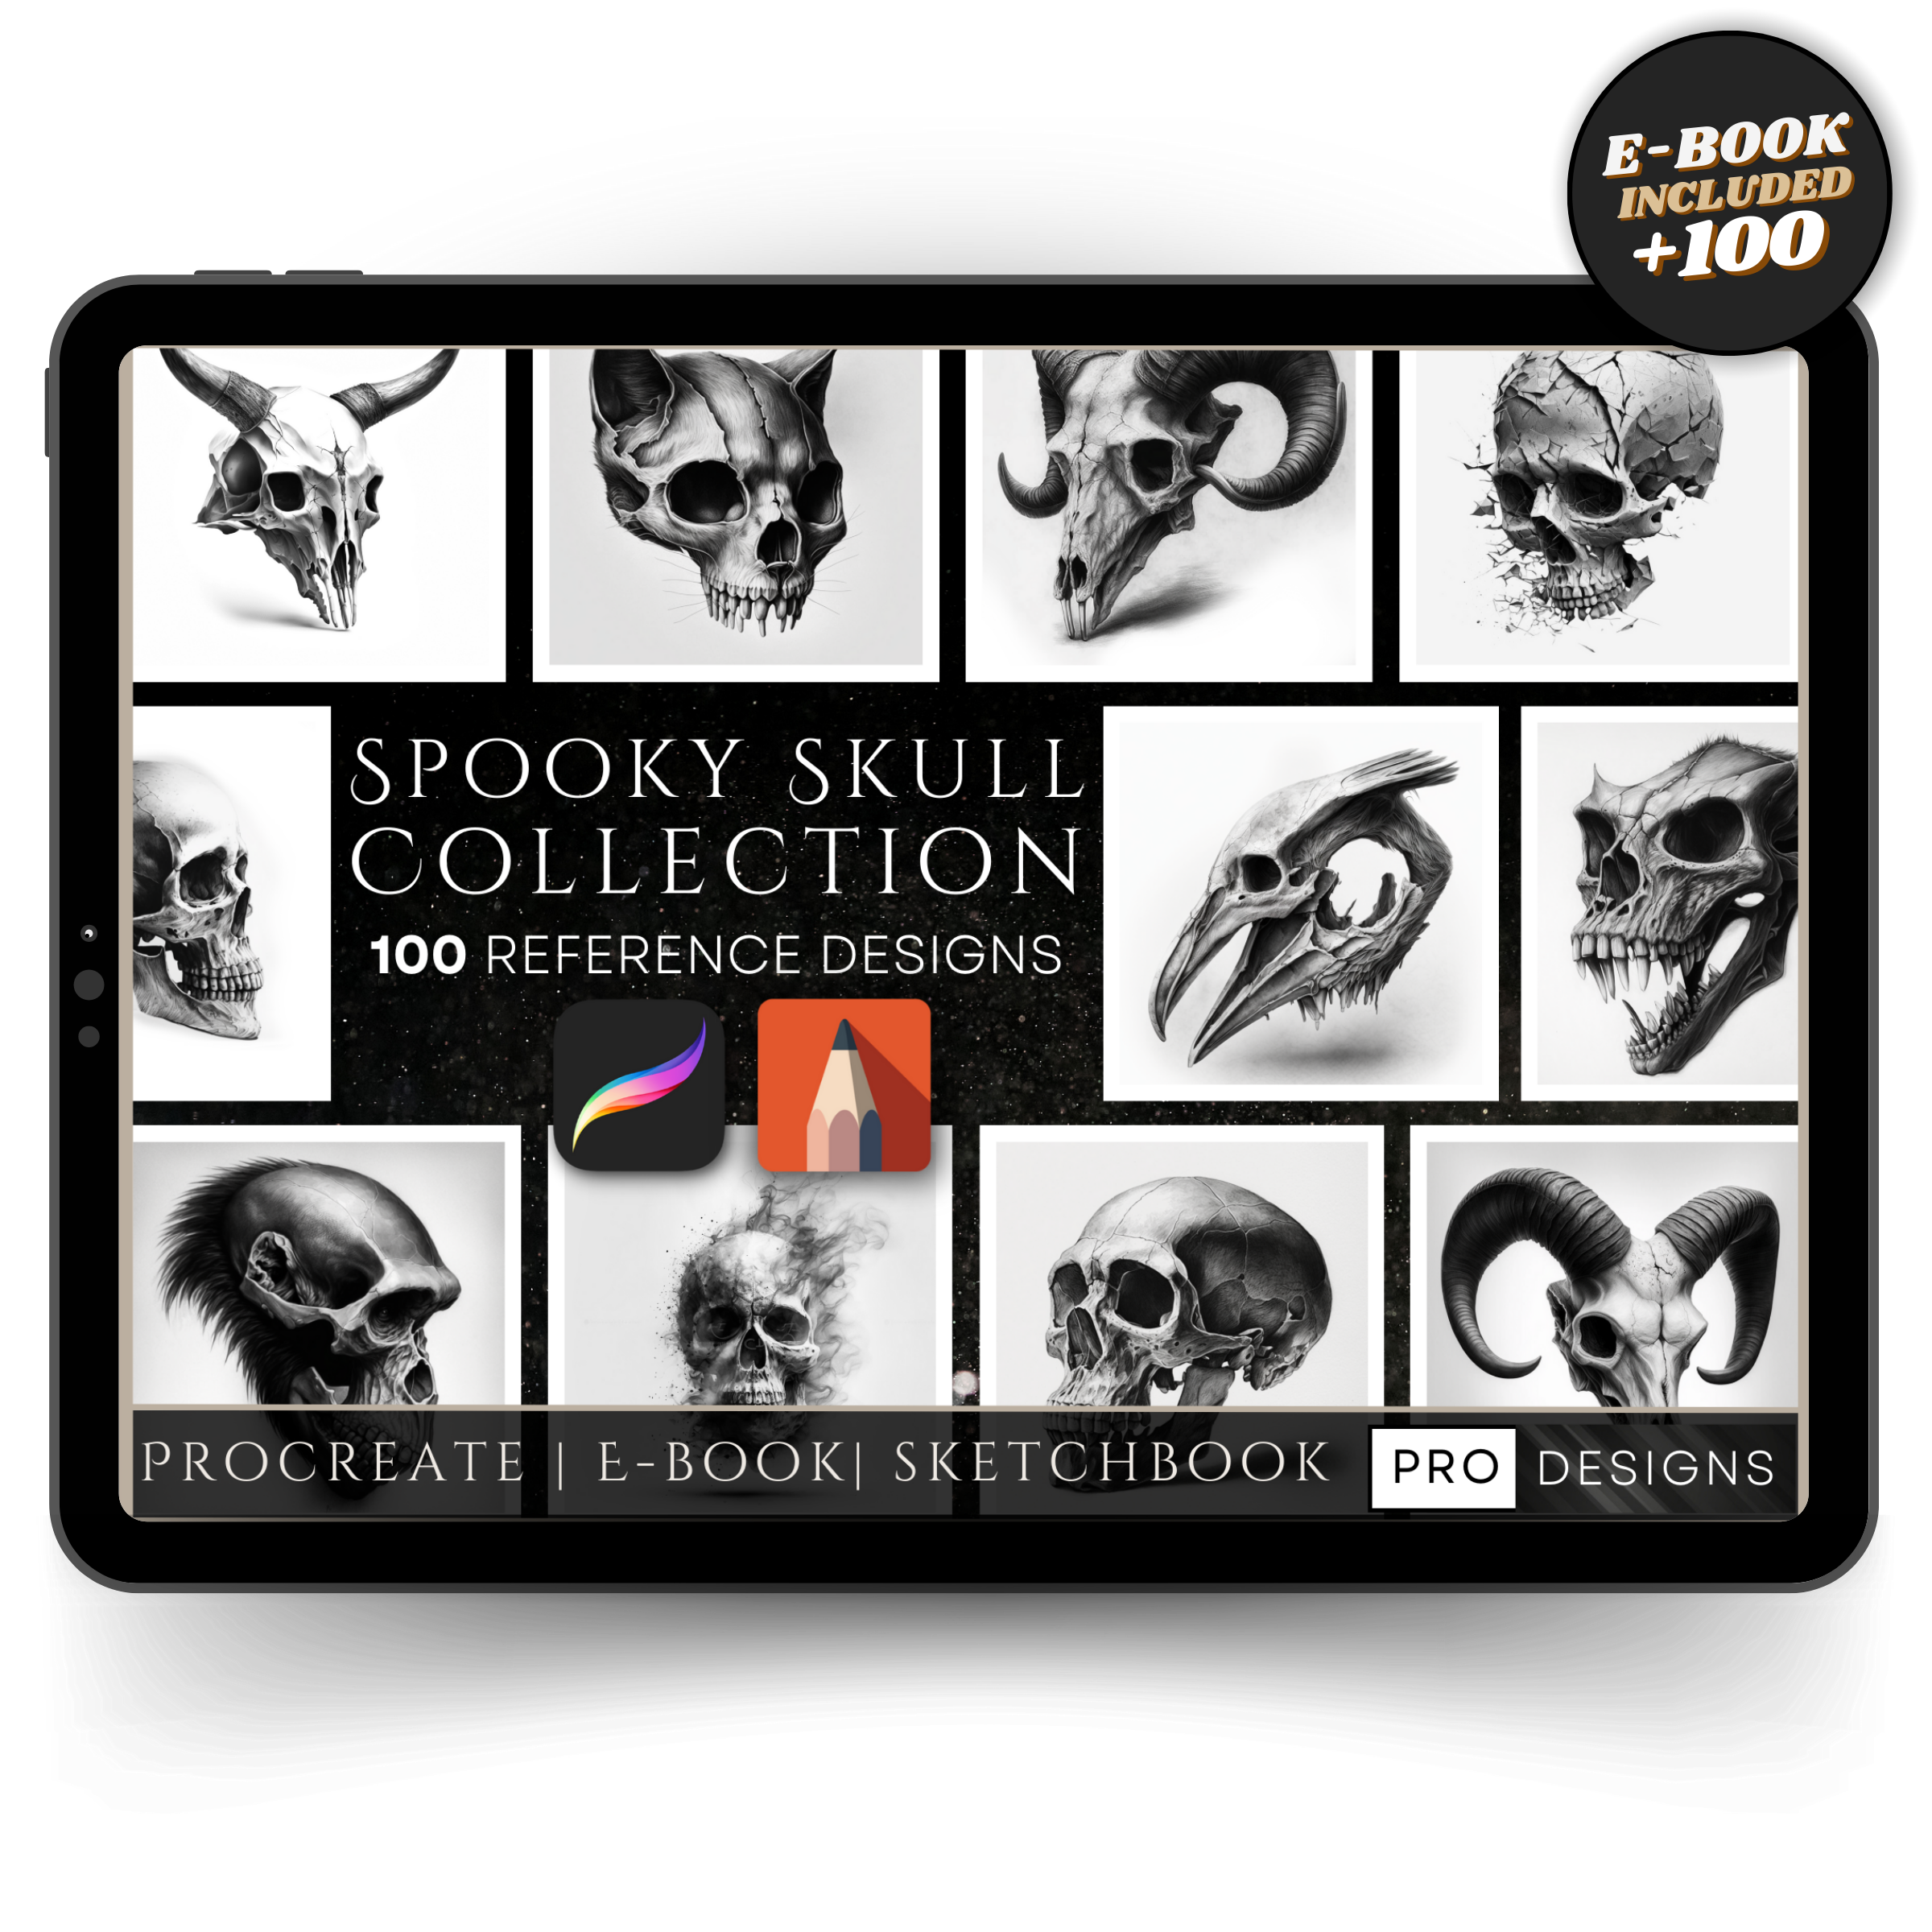 "Shadows and Skulls" - The Spooky Skulls Collection